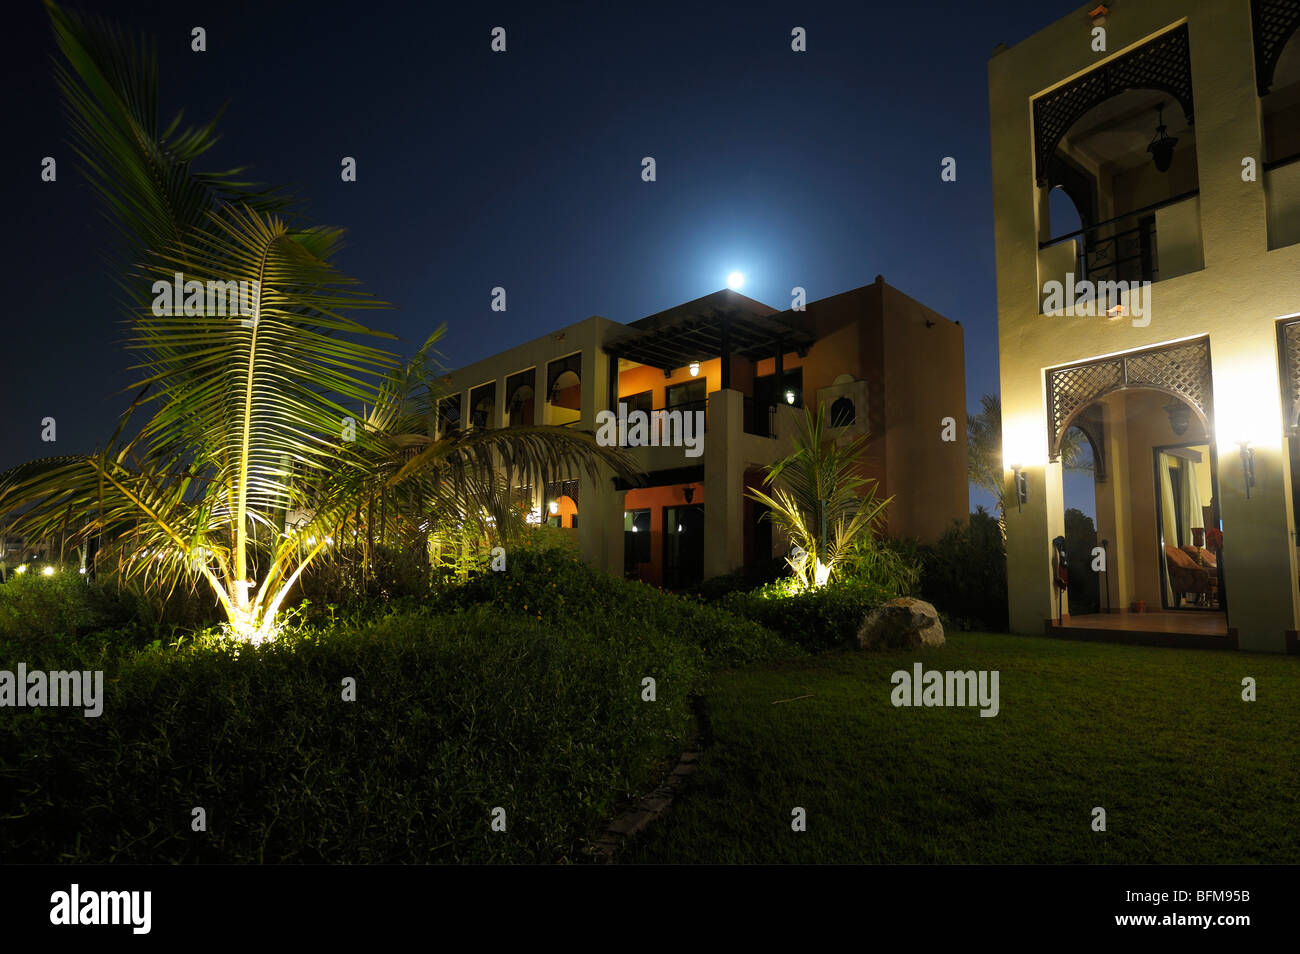 Full Moon over the Beach Front Bungalow and Luxury Private Villa, Ras Al Khaimah UAE Stock Photo